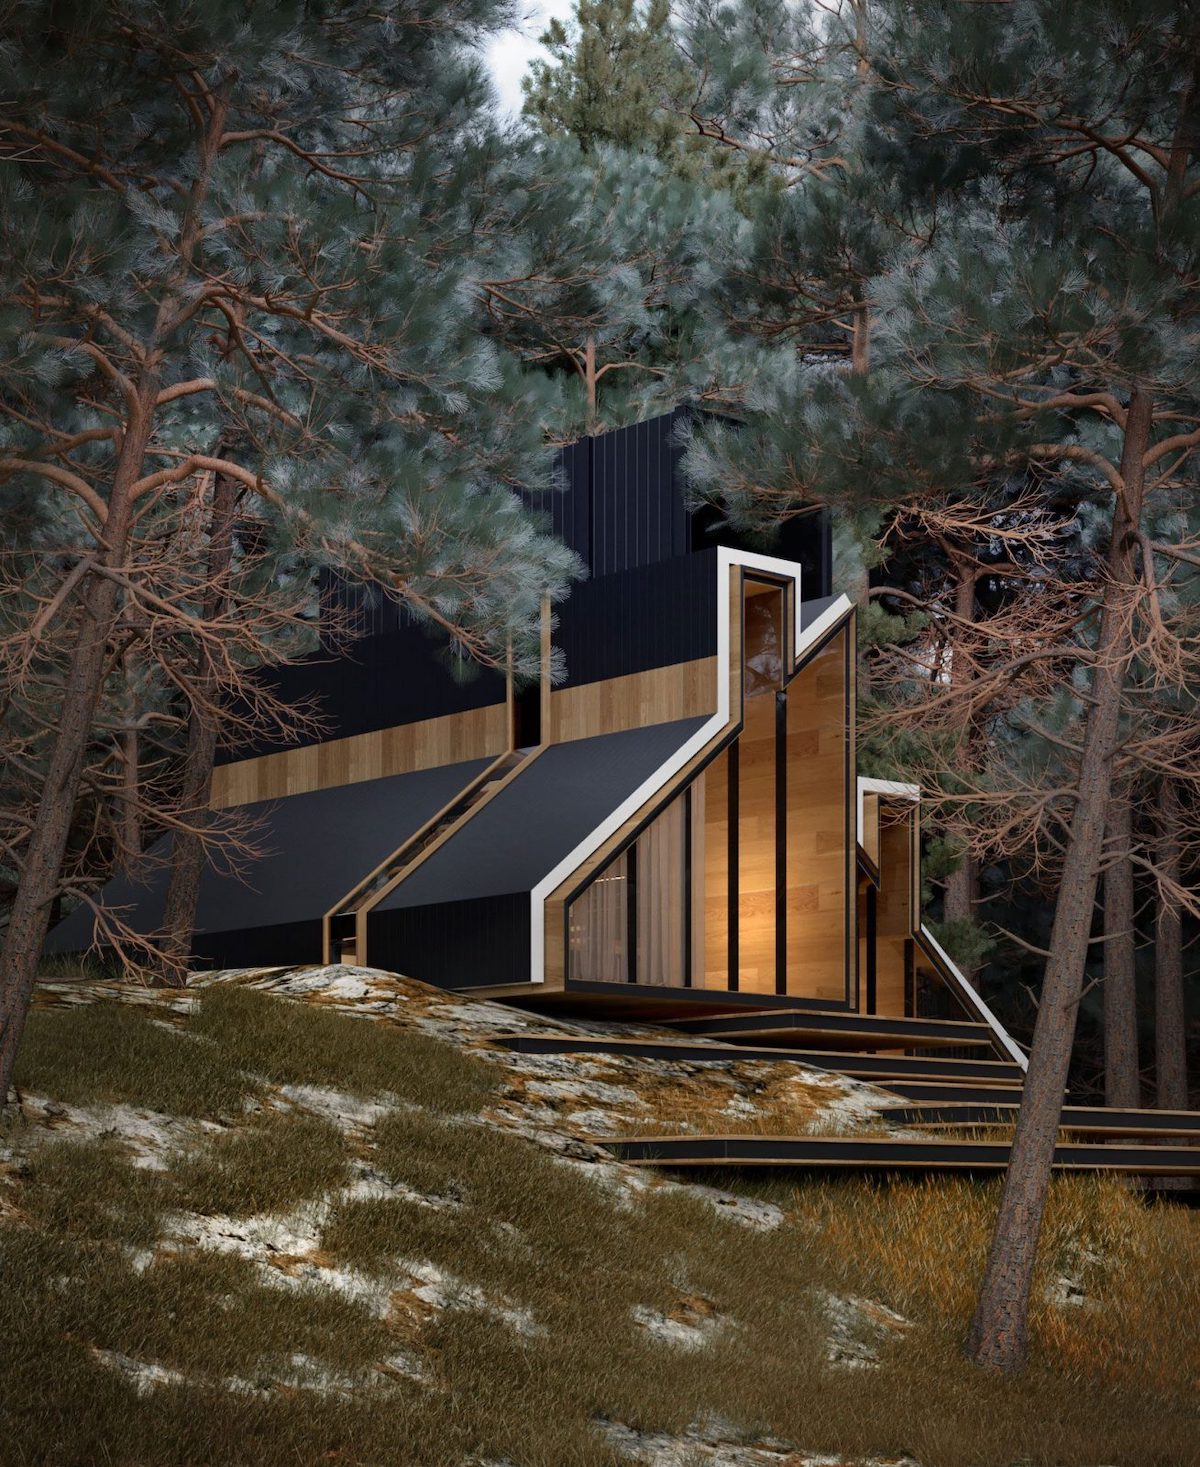 Architect Creates Playful House-Shaped House in Secluded Forest